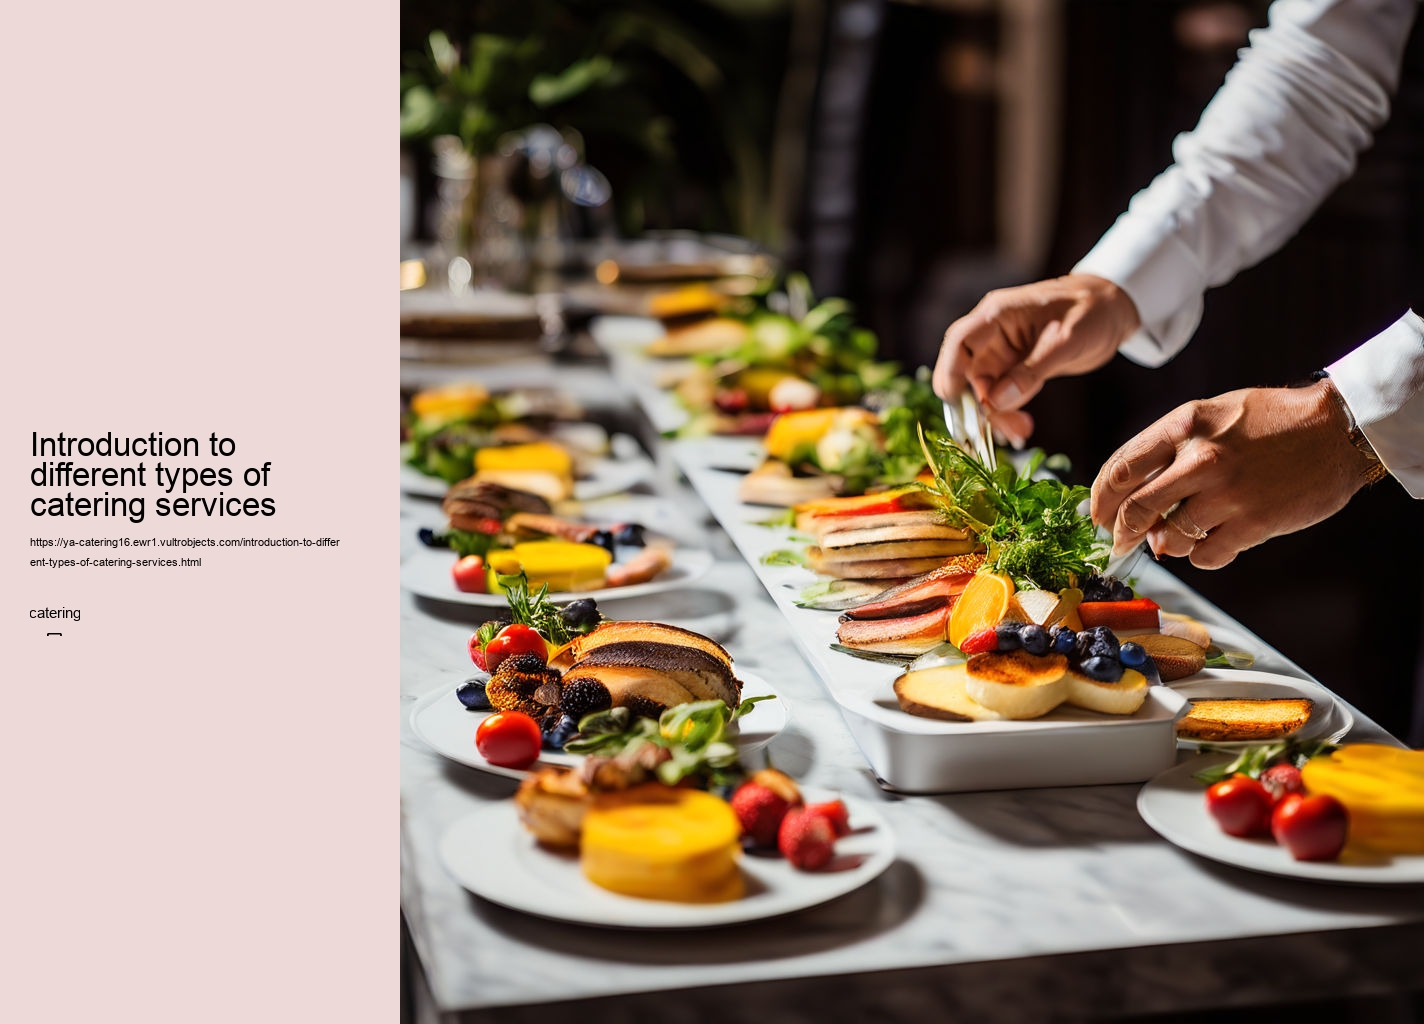 Introduction to different types of catering services